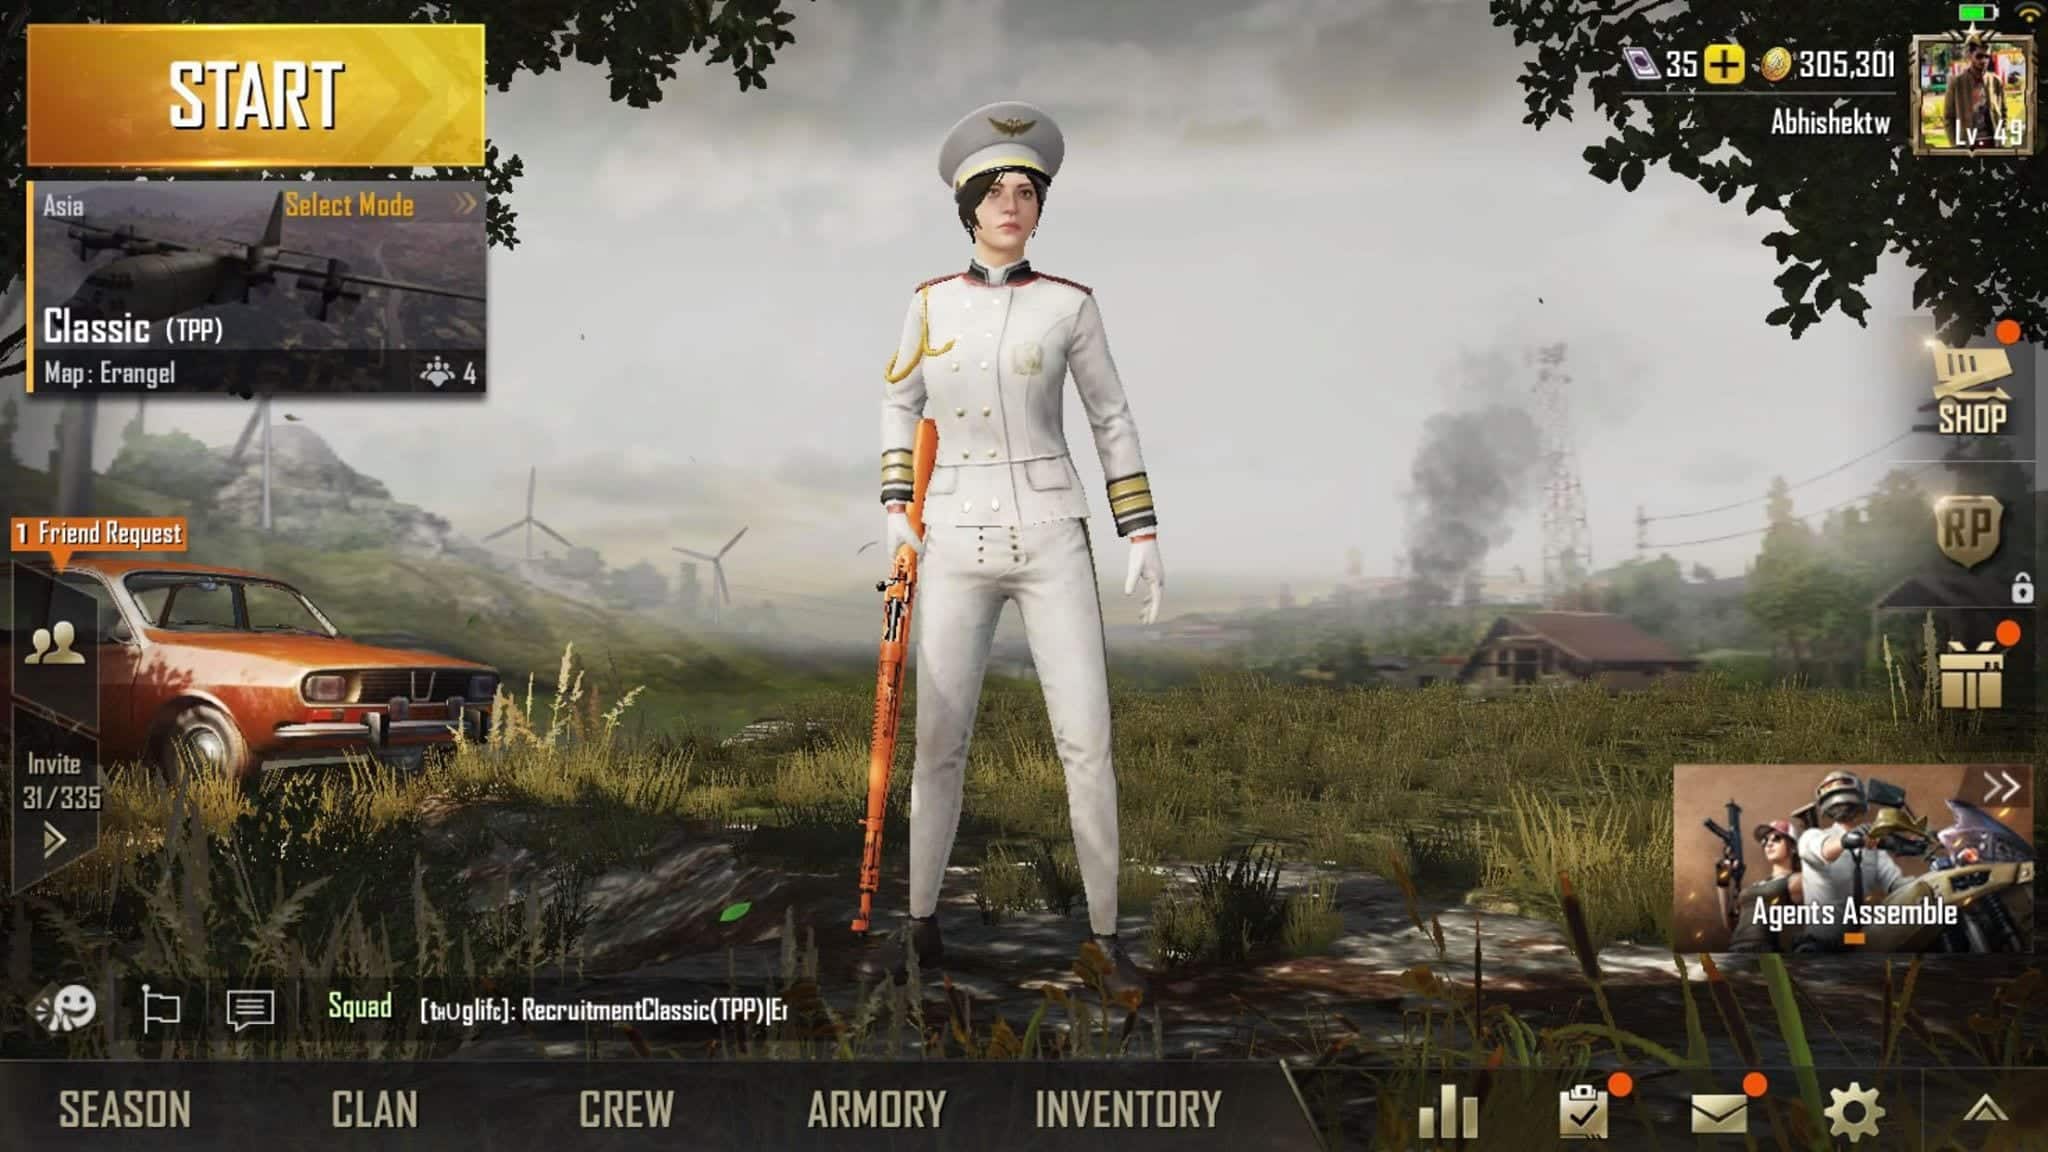 PUBG Mobile Season 3 Release Date, New Maps And Updates